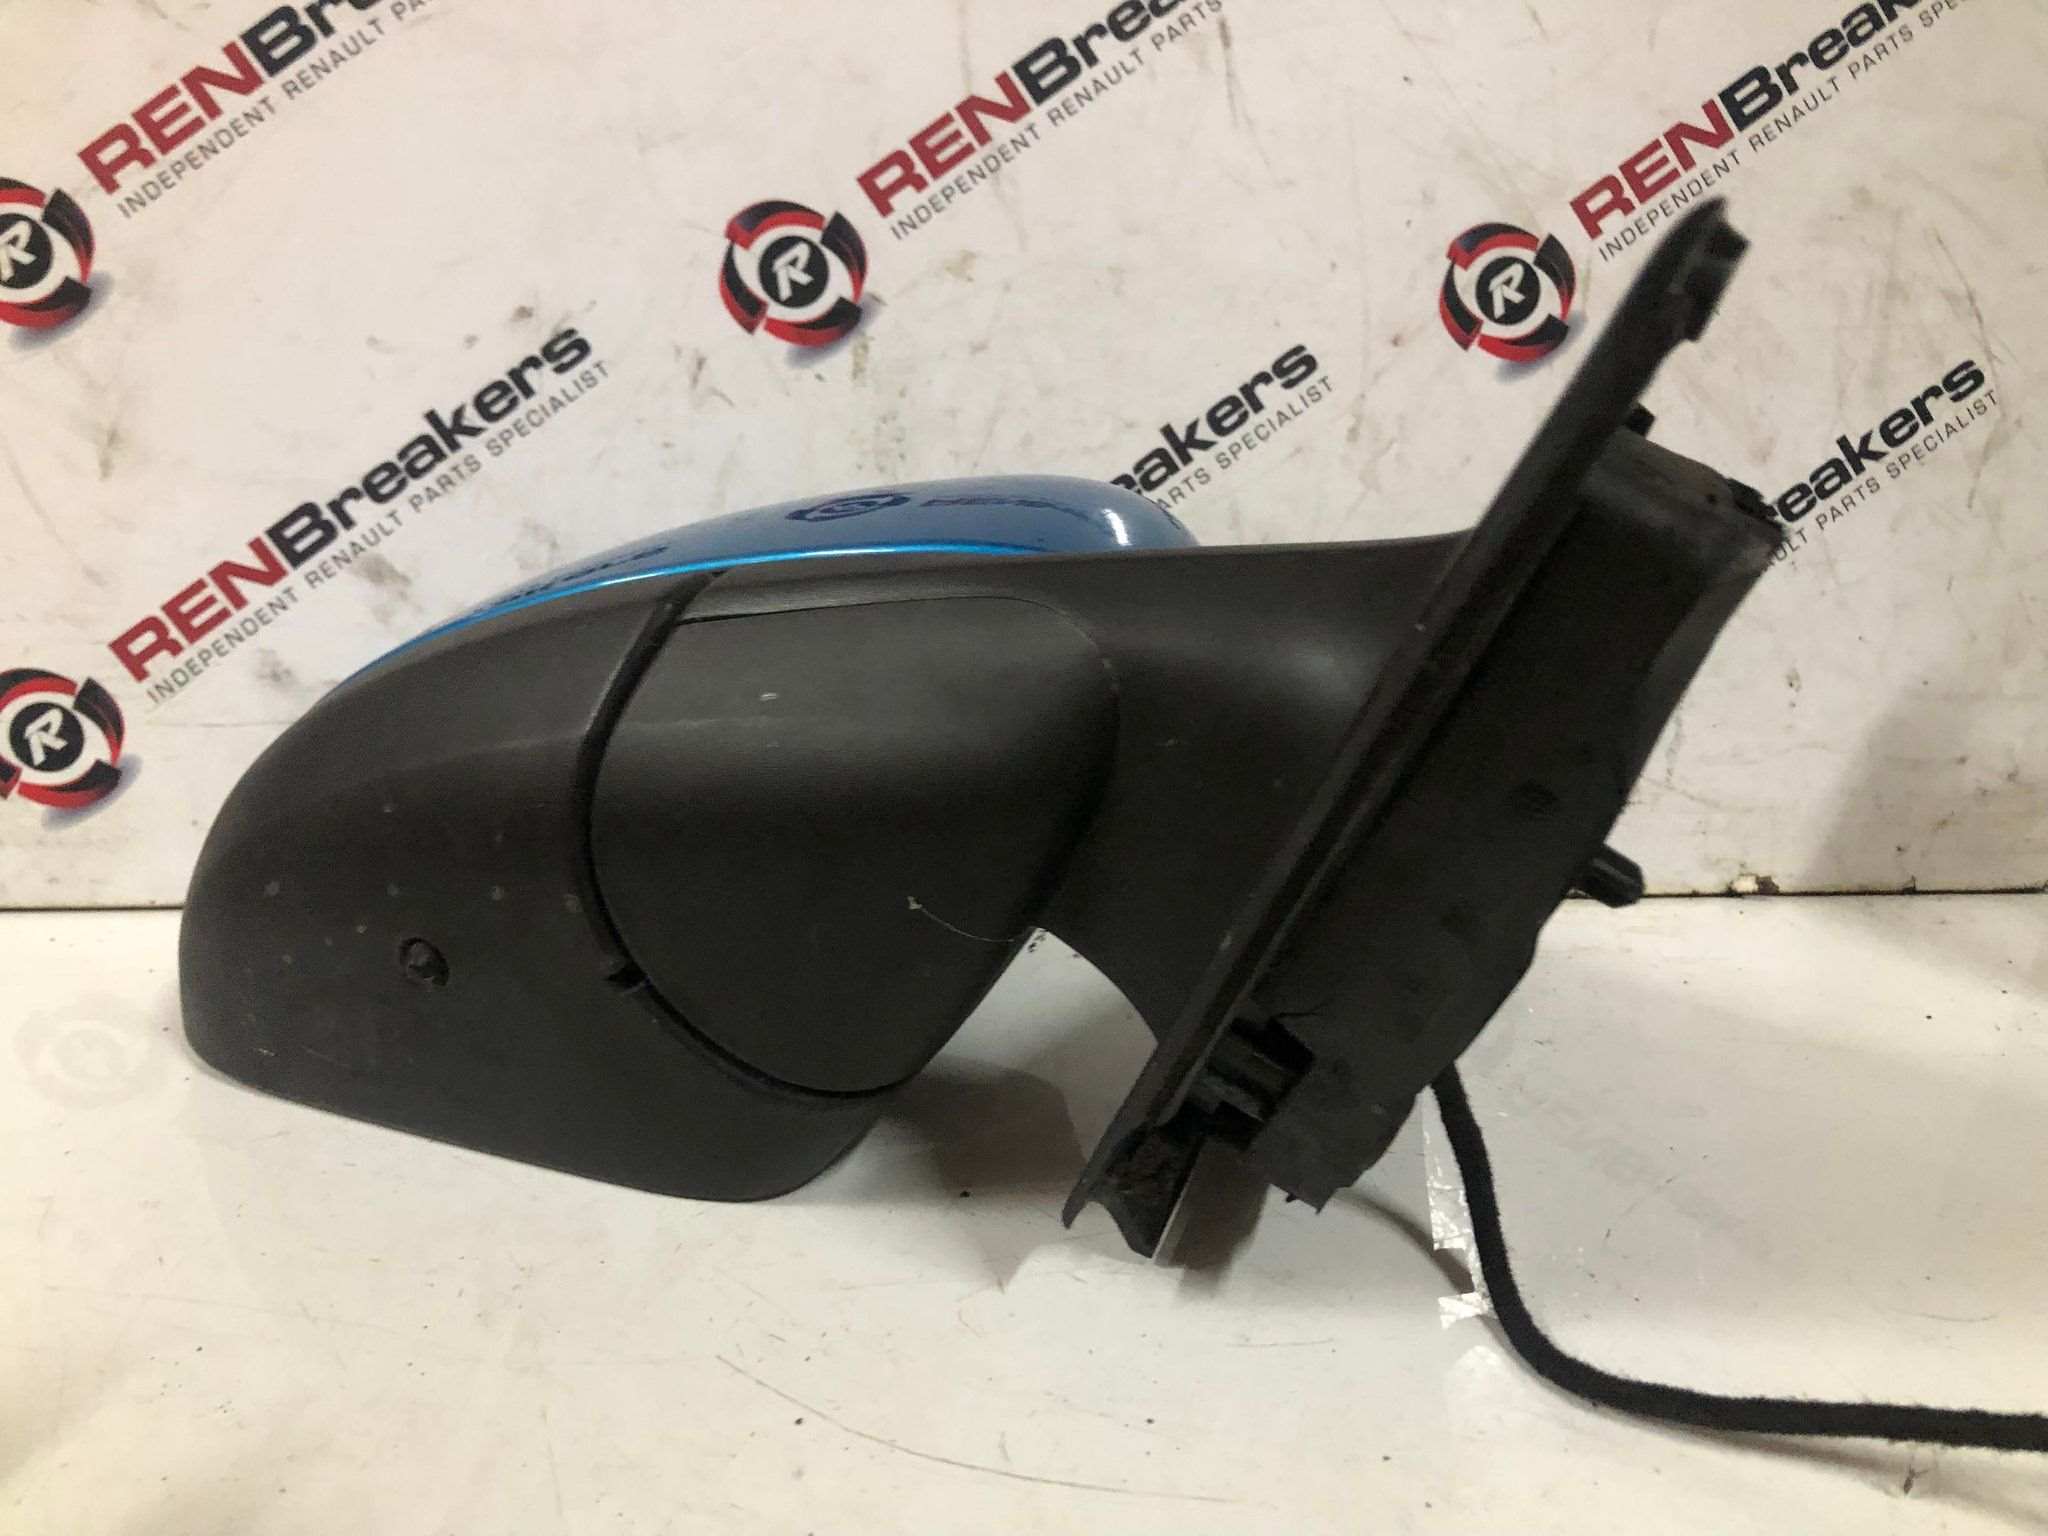 Renault Twingo 2014-2017 Drivers Side Os OSF Wing Mirror Terpm Blue 7202-103LH